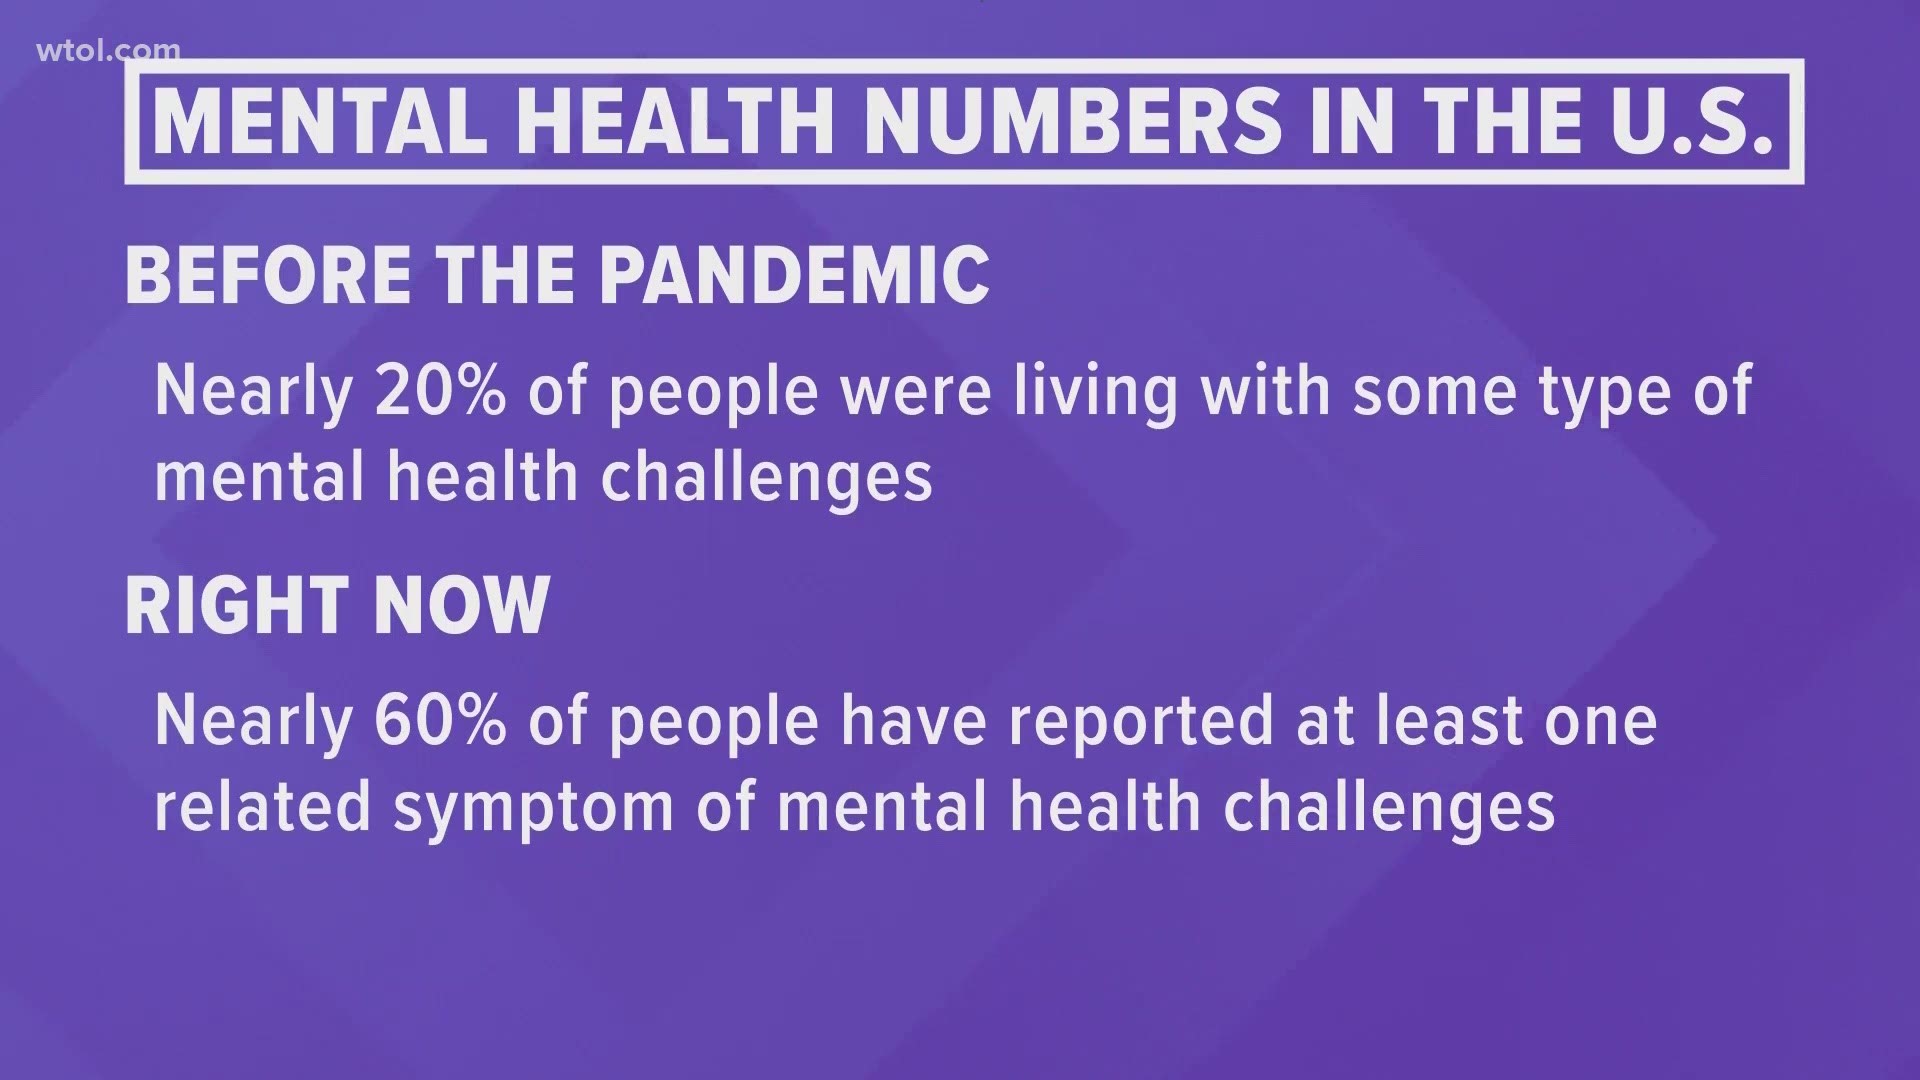 It's no surprise the pandemic has taken a toll on us and our mental health over the last year. According to experts, all signs indicate that trend will continue.